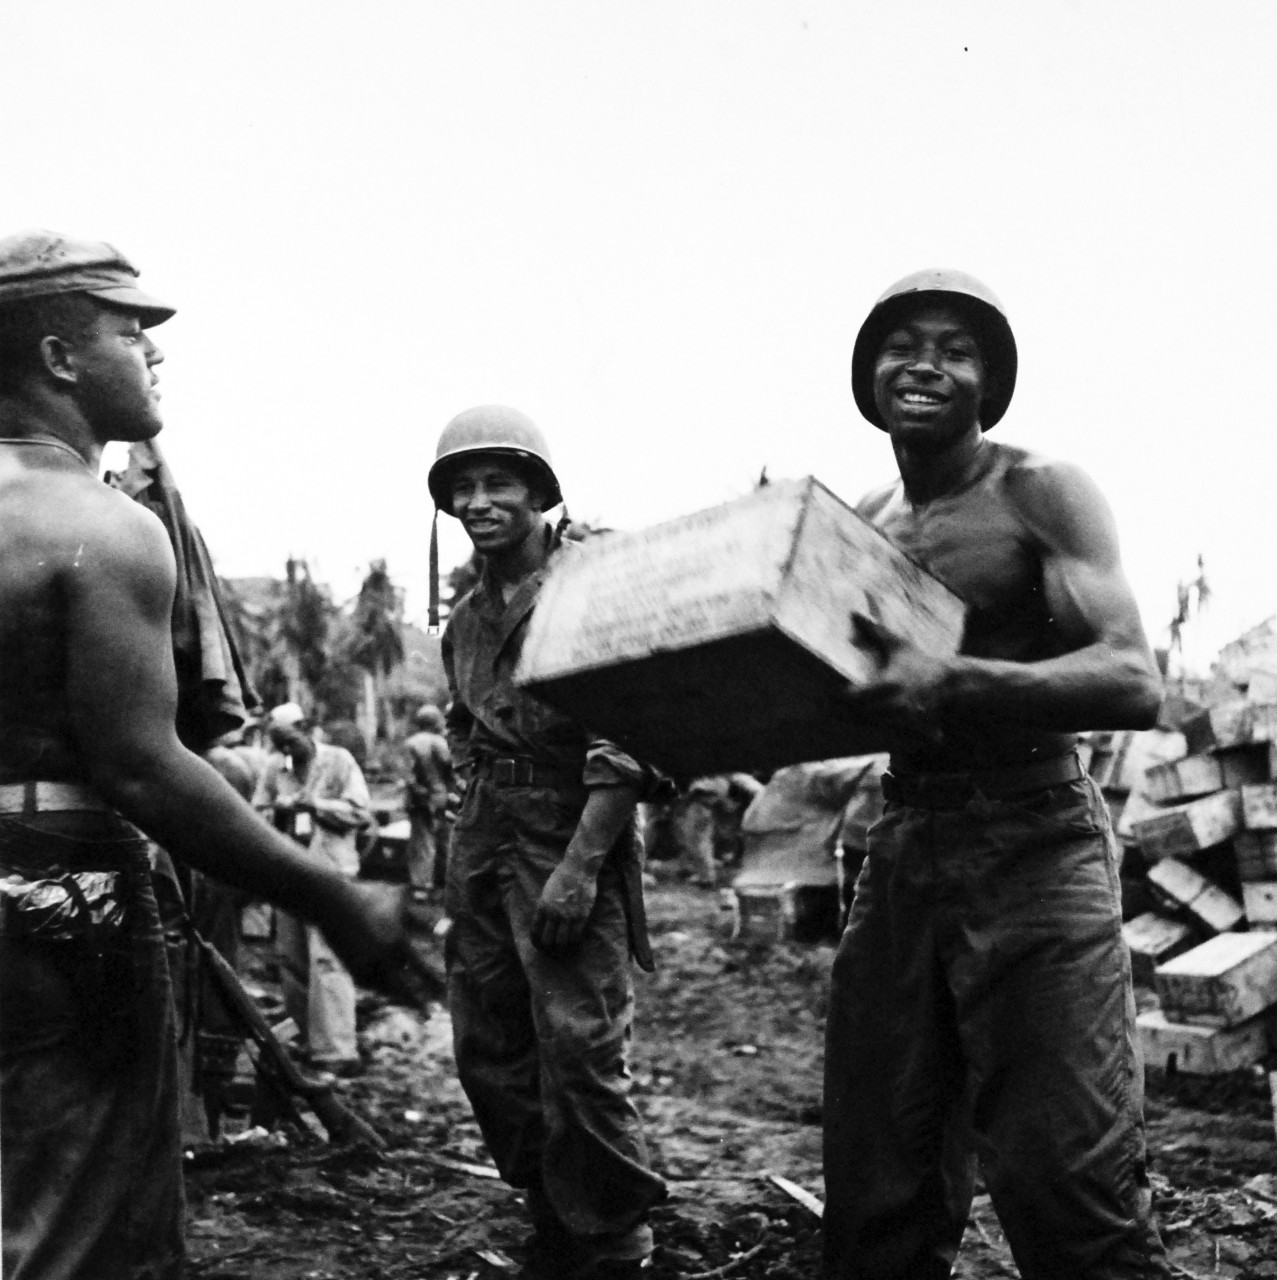 80-G-475161:  Invasion of Guam, July 21-August 10, 1944.  African-American ammunition handlers unload boxes for use in the battle.  Photographed by Lieutenant Paul Dorsey, July 1944, TR-10777.      Official U.S. Navy photograph, now in the collections of the National Archives.   (2017/03/15).